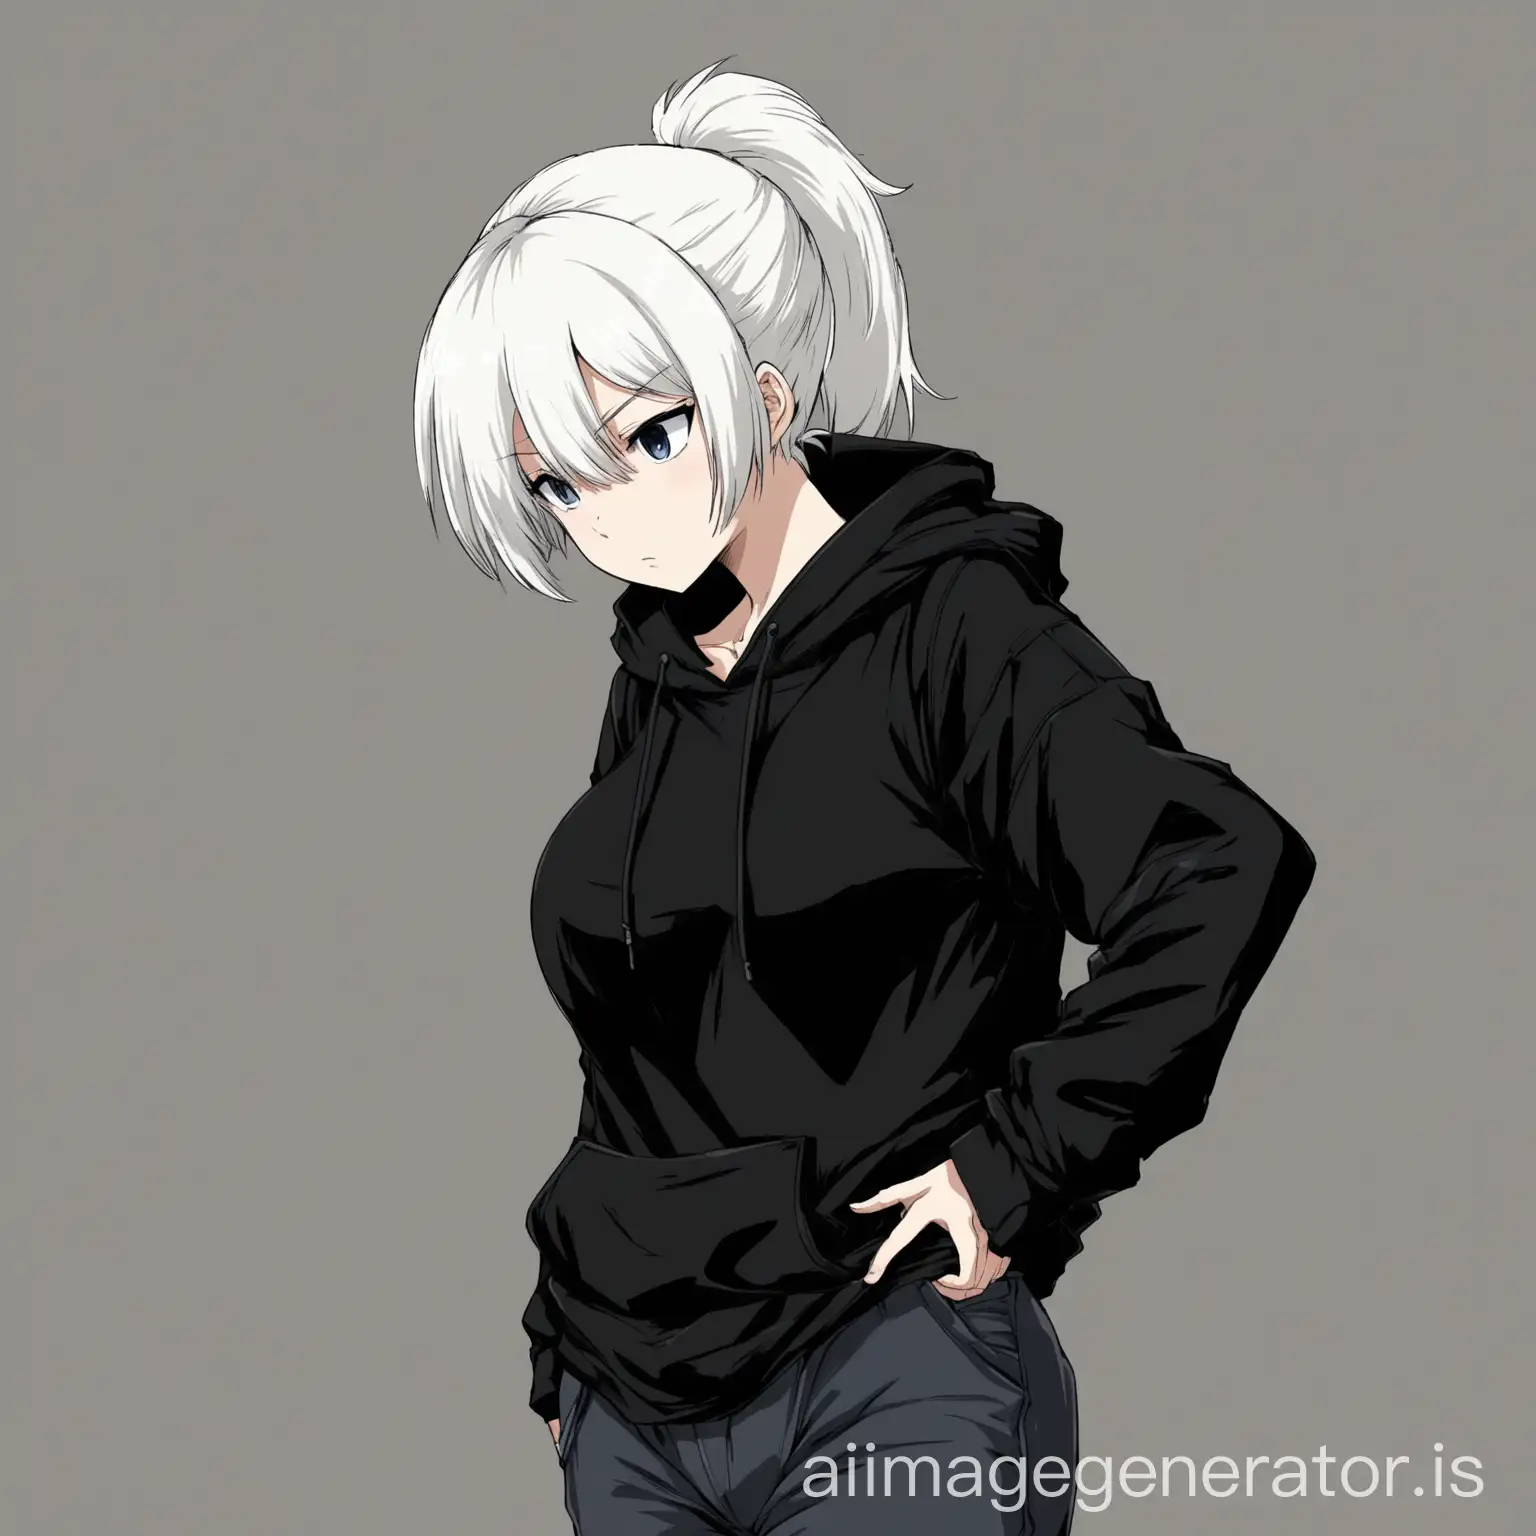 anime 2d art style, girl, short white hair, ponytail, black tomboy clothes, black hoodie, pants, trying to hide large breasts